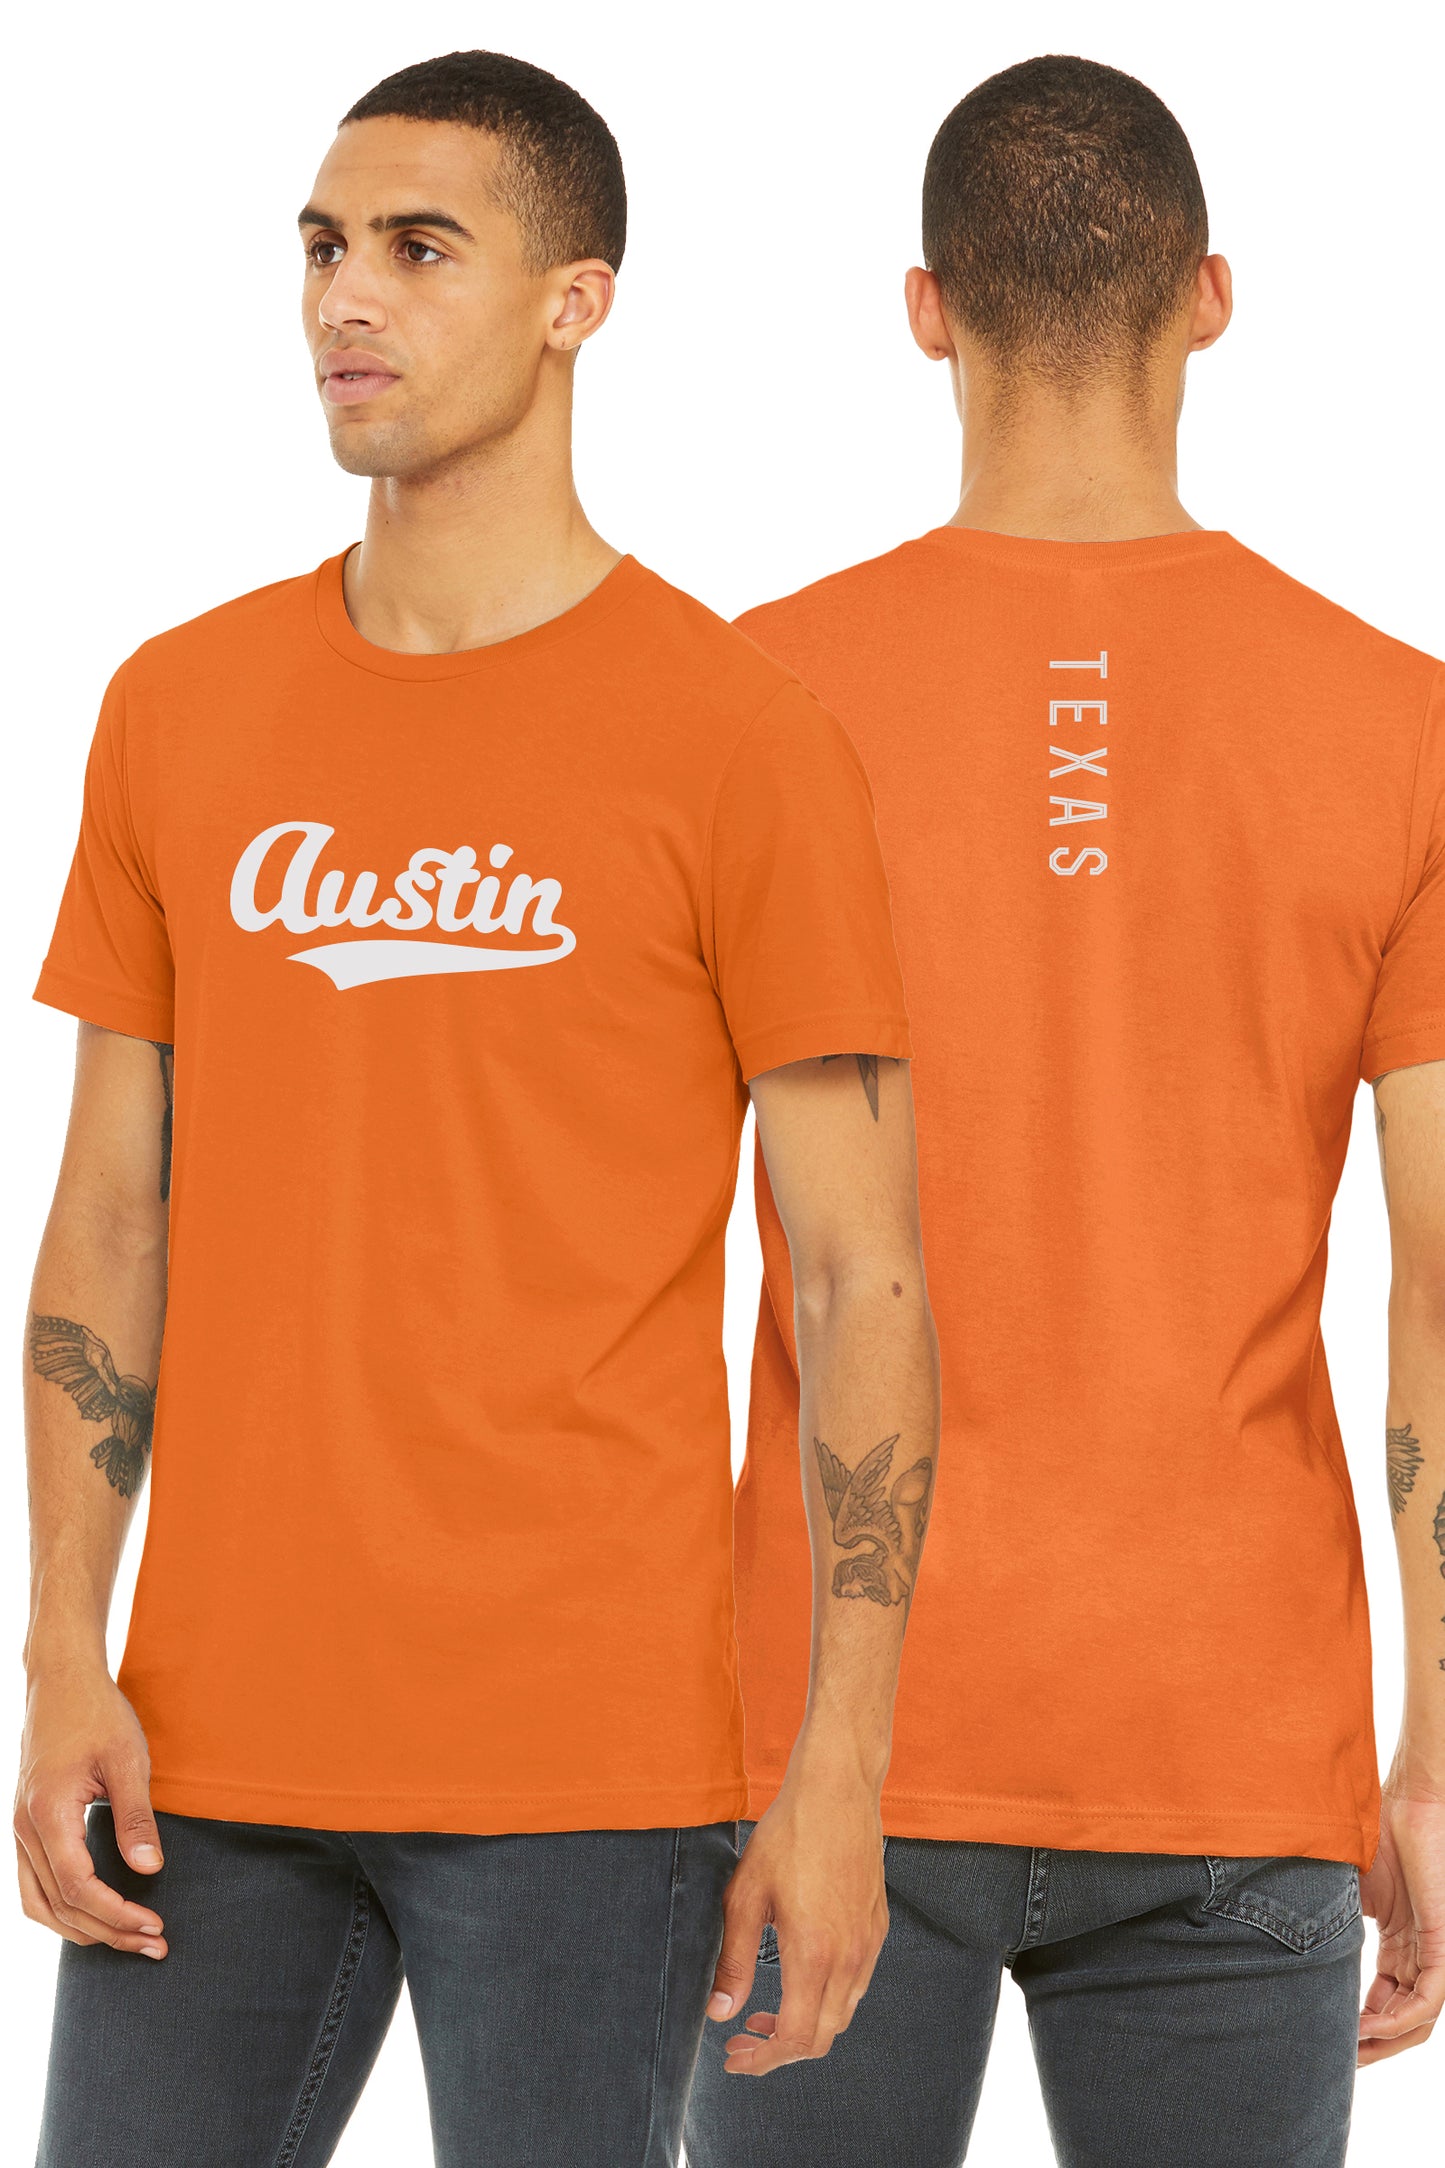 Daxton Adult Unisex Tshirt Austin Script with Texas Vertical on the Back